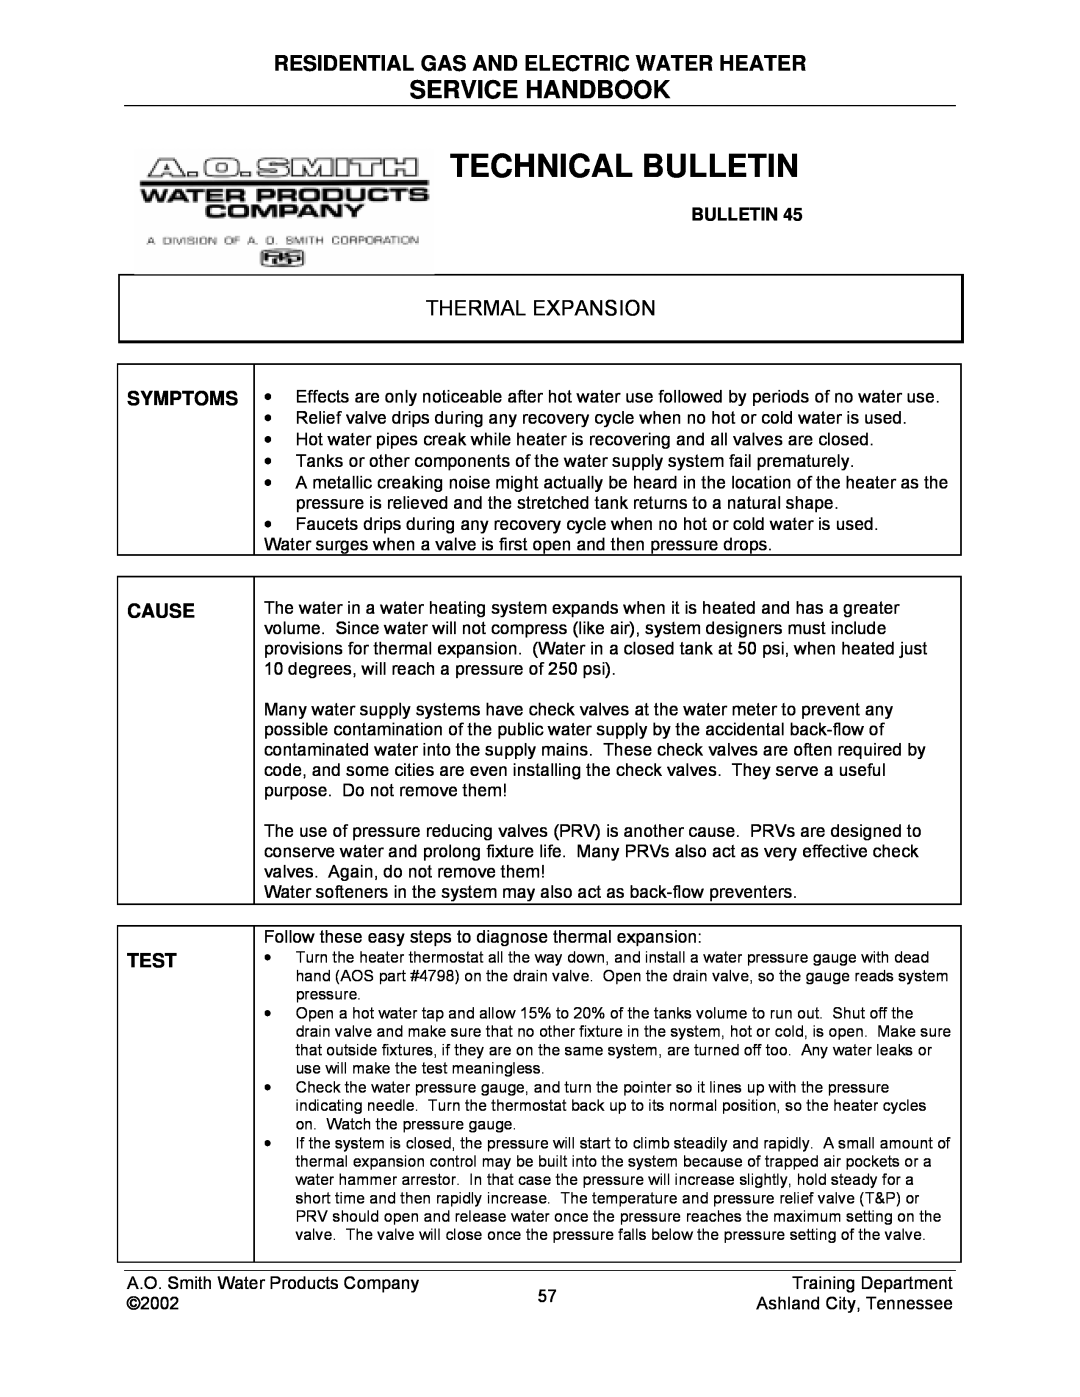 A.O. Smith TC-049-R2 Technical Bulletin, Service Handbook, Residential Gas And Electric Water Heater, Thermal Expansion 